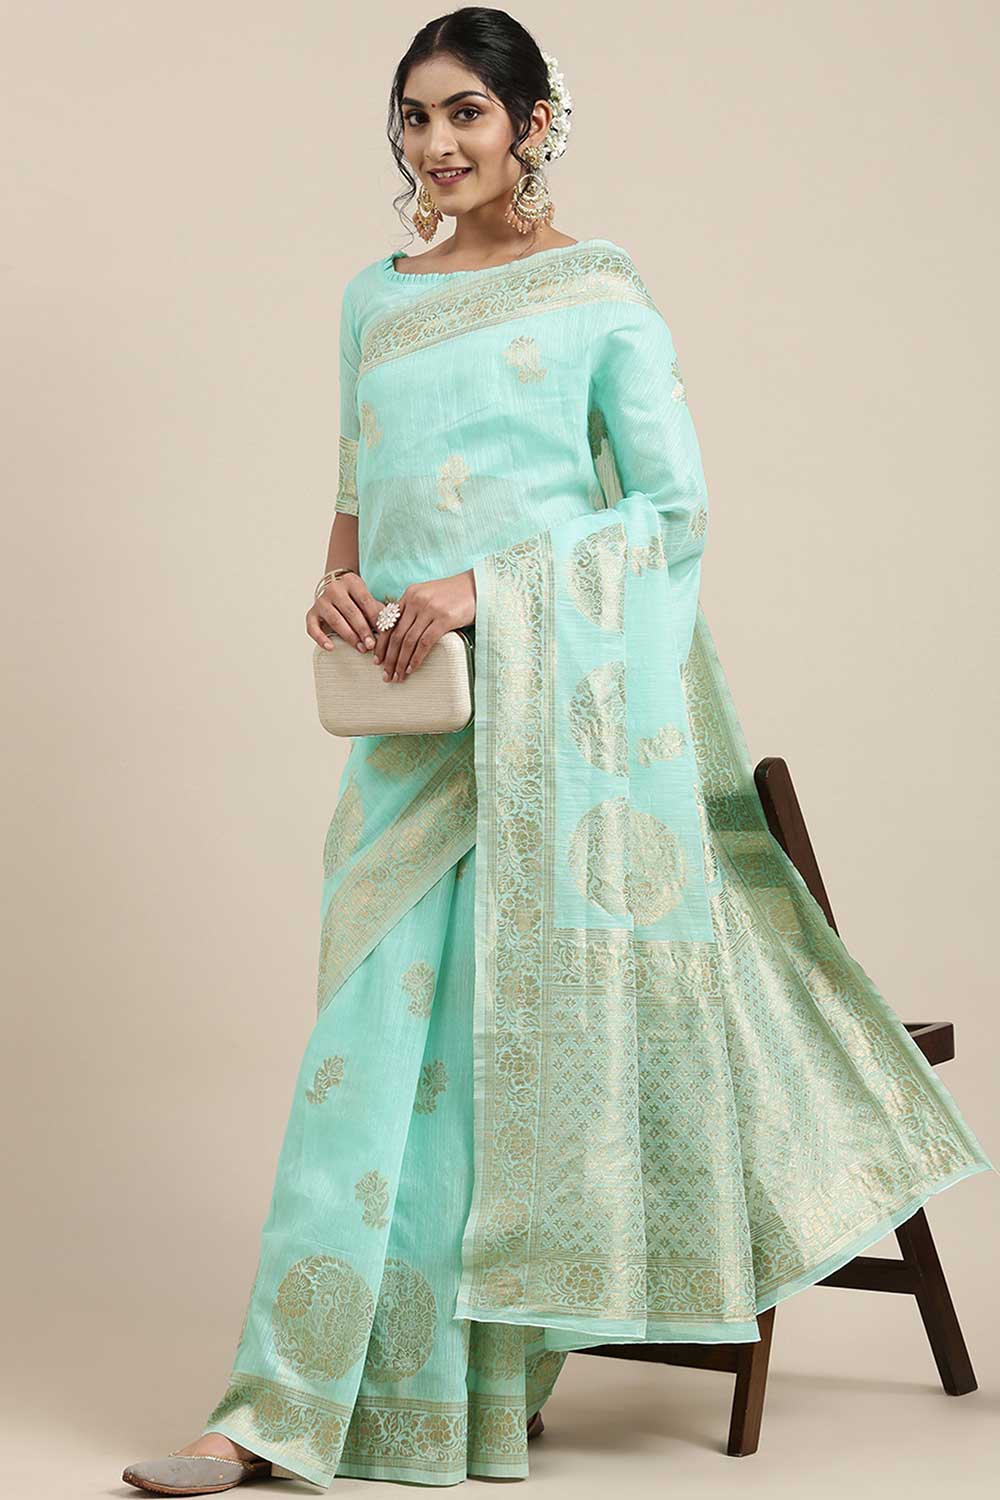 Marie Sea Green Floral Woven Linen One Minute Saree